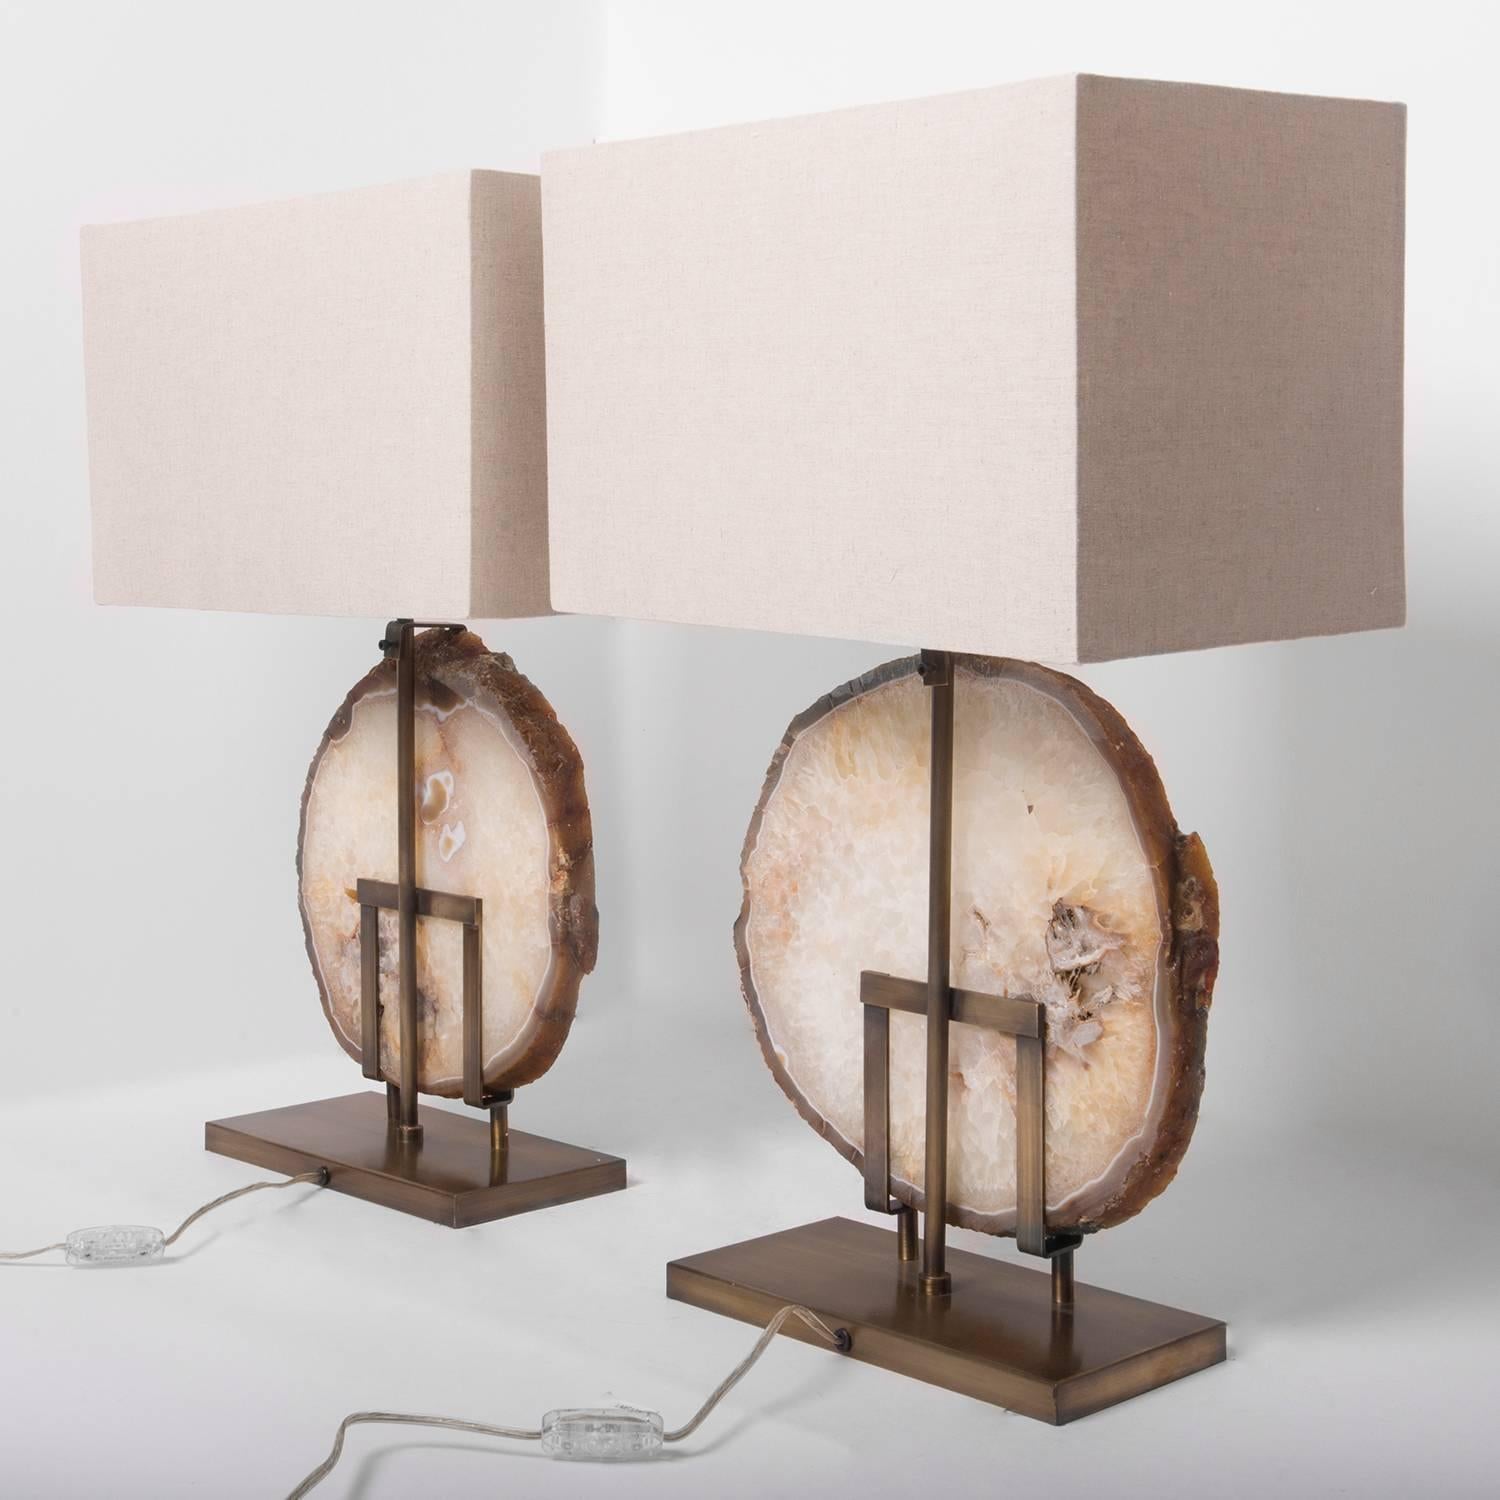 Polished Pair of Brazilian Beige Agate Table Lamps, Brushed Brass Base, Beige Linen Shade